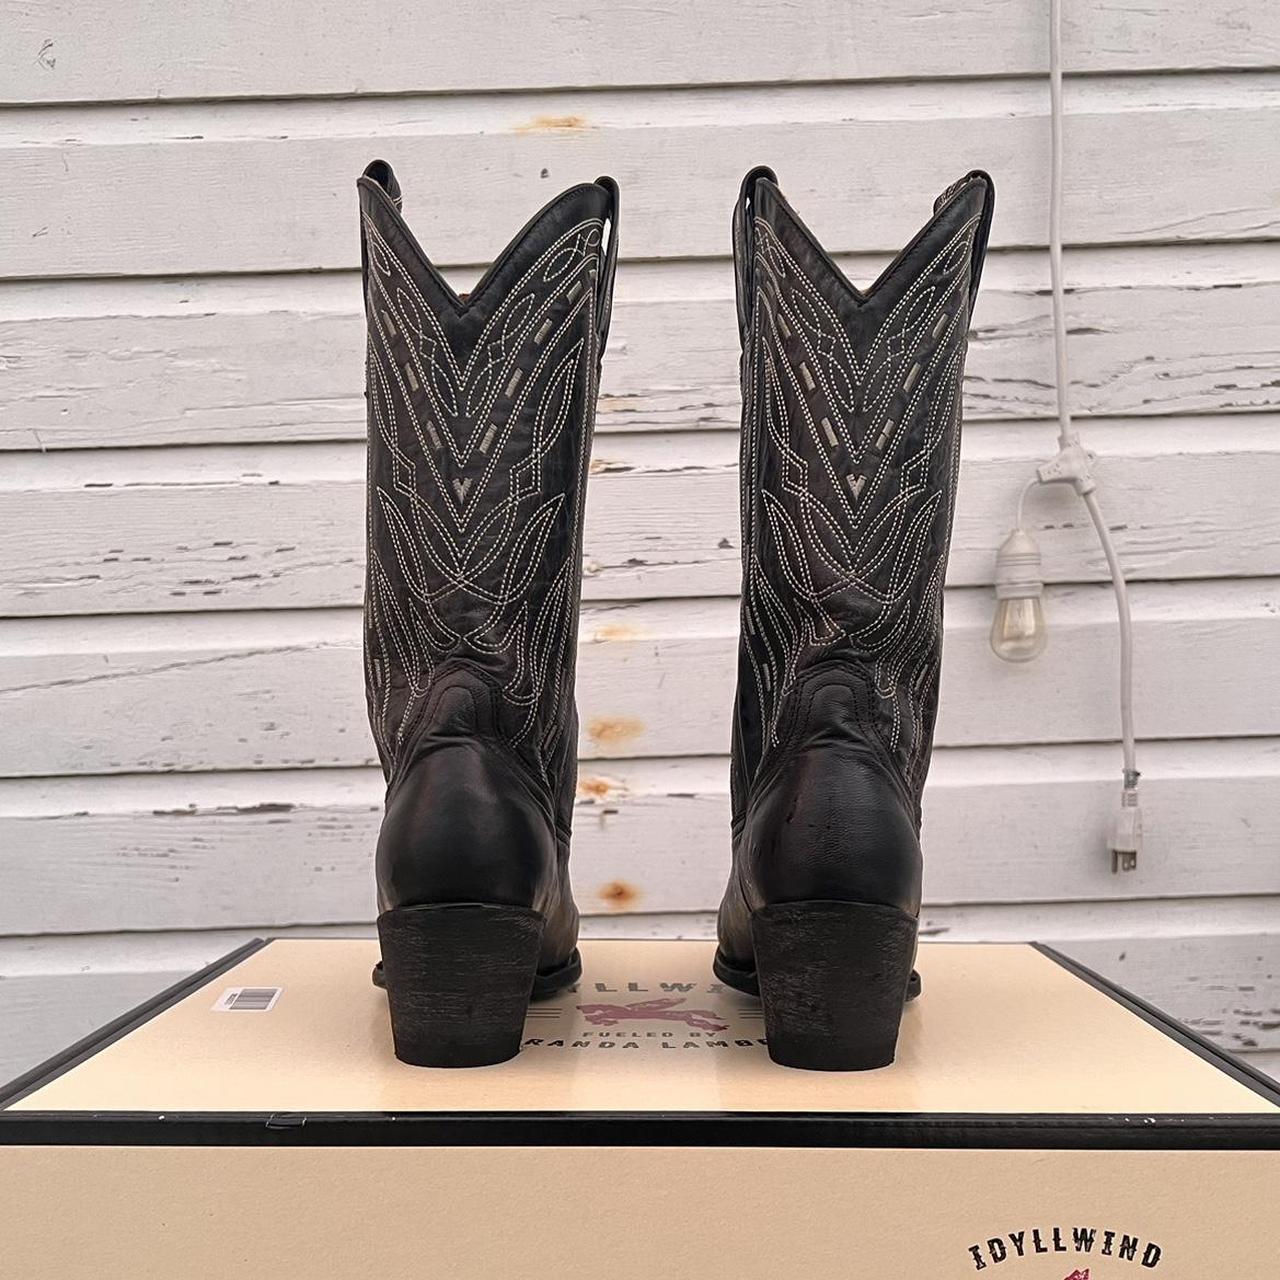 Boot Barn - Every pair of boots tells a story. Share your “In These Boots”  moments with us using #Idyllwind 👢#MirandaLambert #BootBarn #inspiration  #motivation #wonderweststyle #country #countrymusic #lifestyle #rebel  #bosslady #li